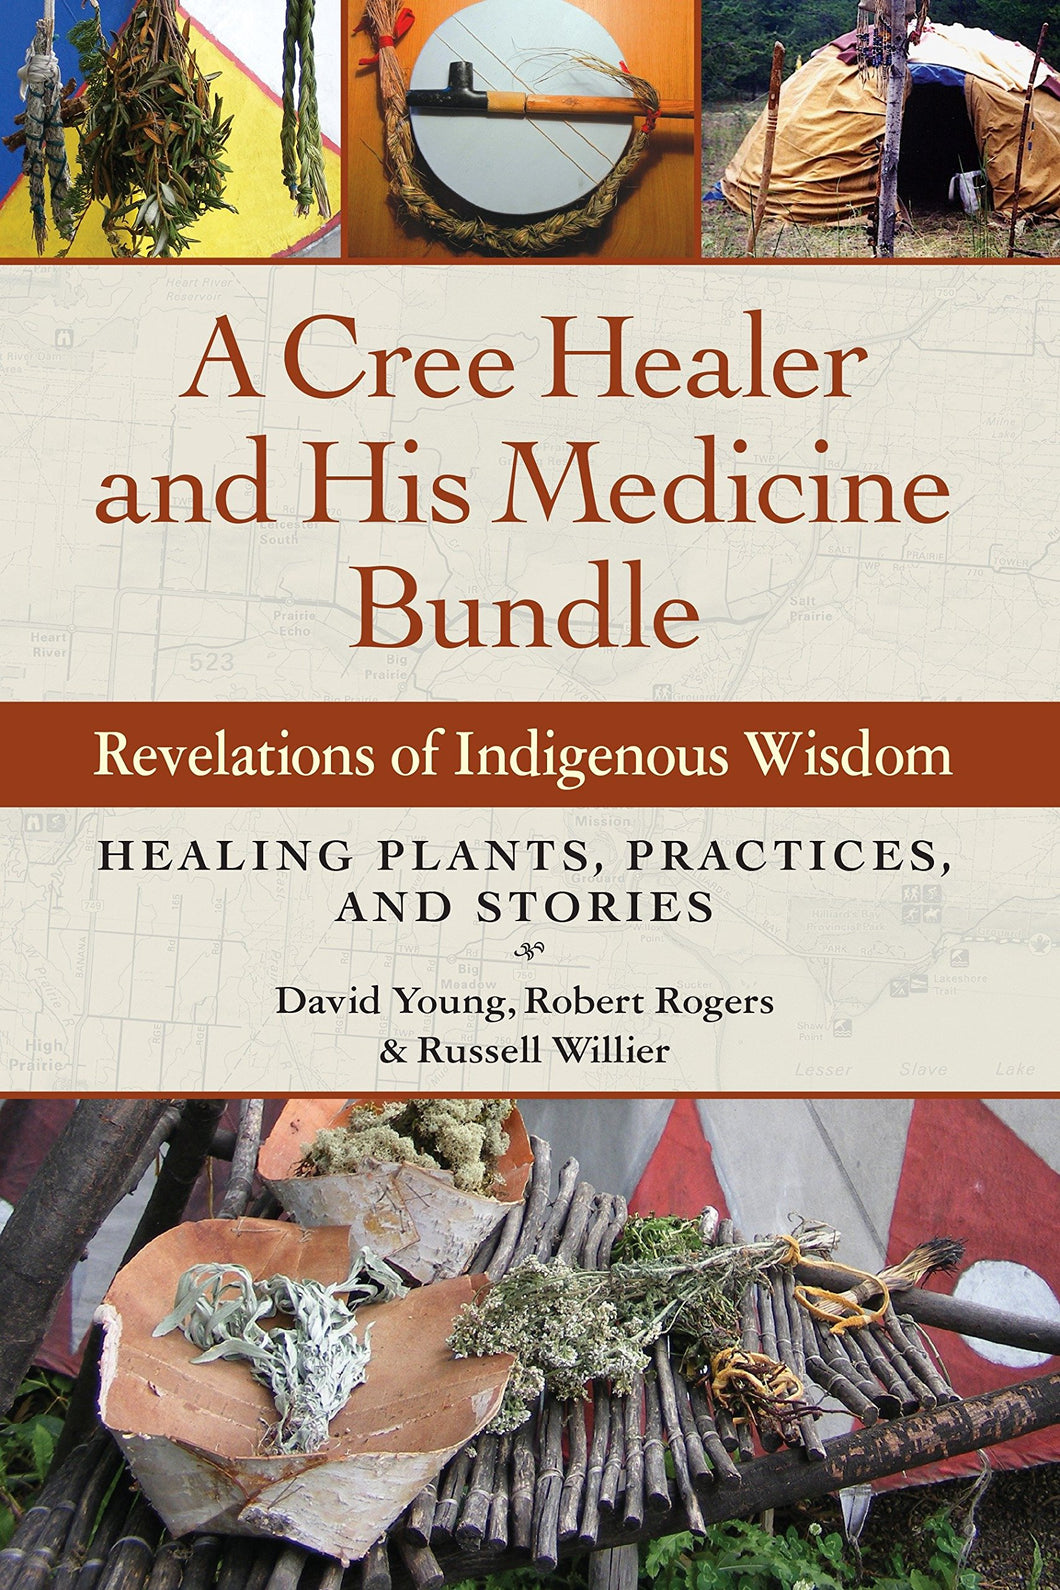 A Cree Healer and His Medicine Bundle: Revelations of Indigenous Wisdom--Healing Plants, Practices, and Stories [David Young, Robert Rogers & Russell Willier]